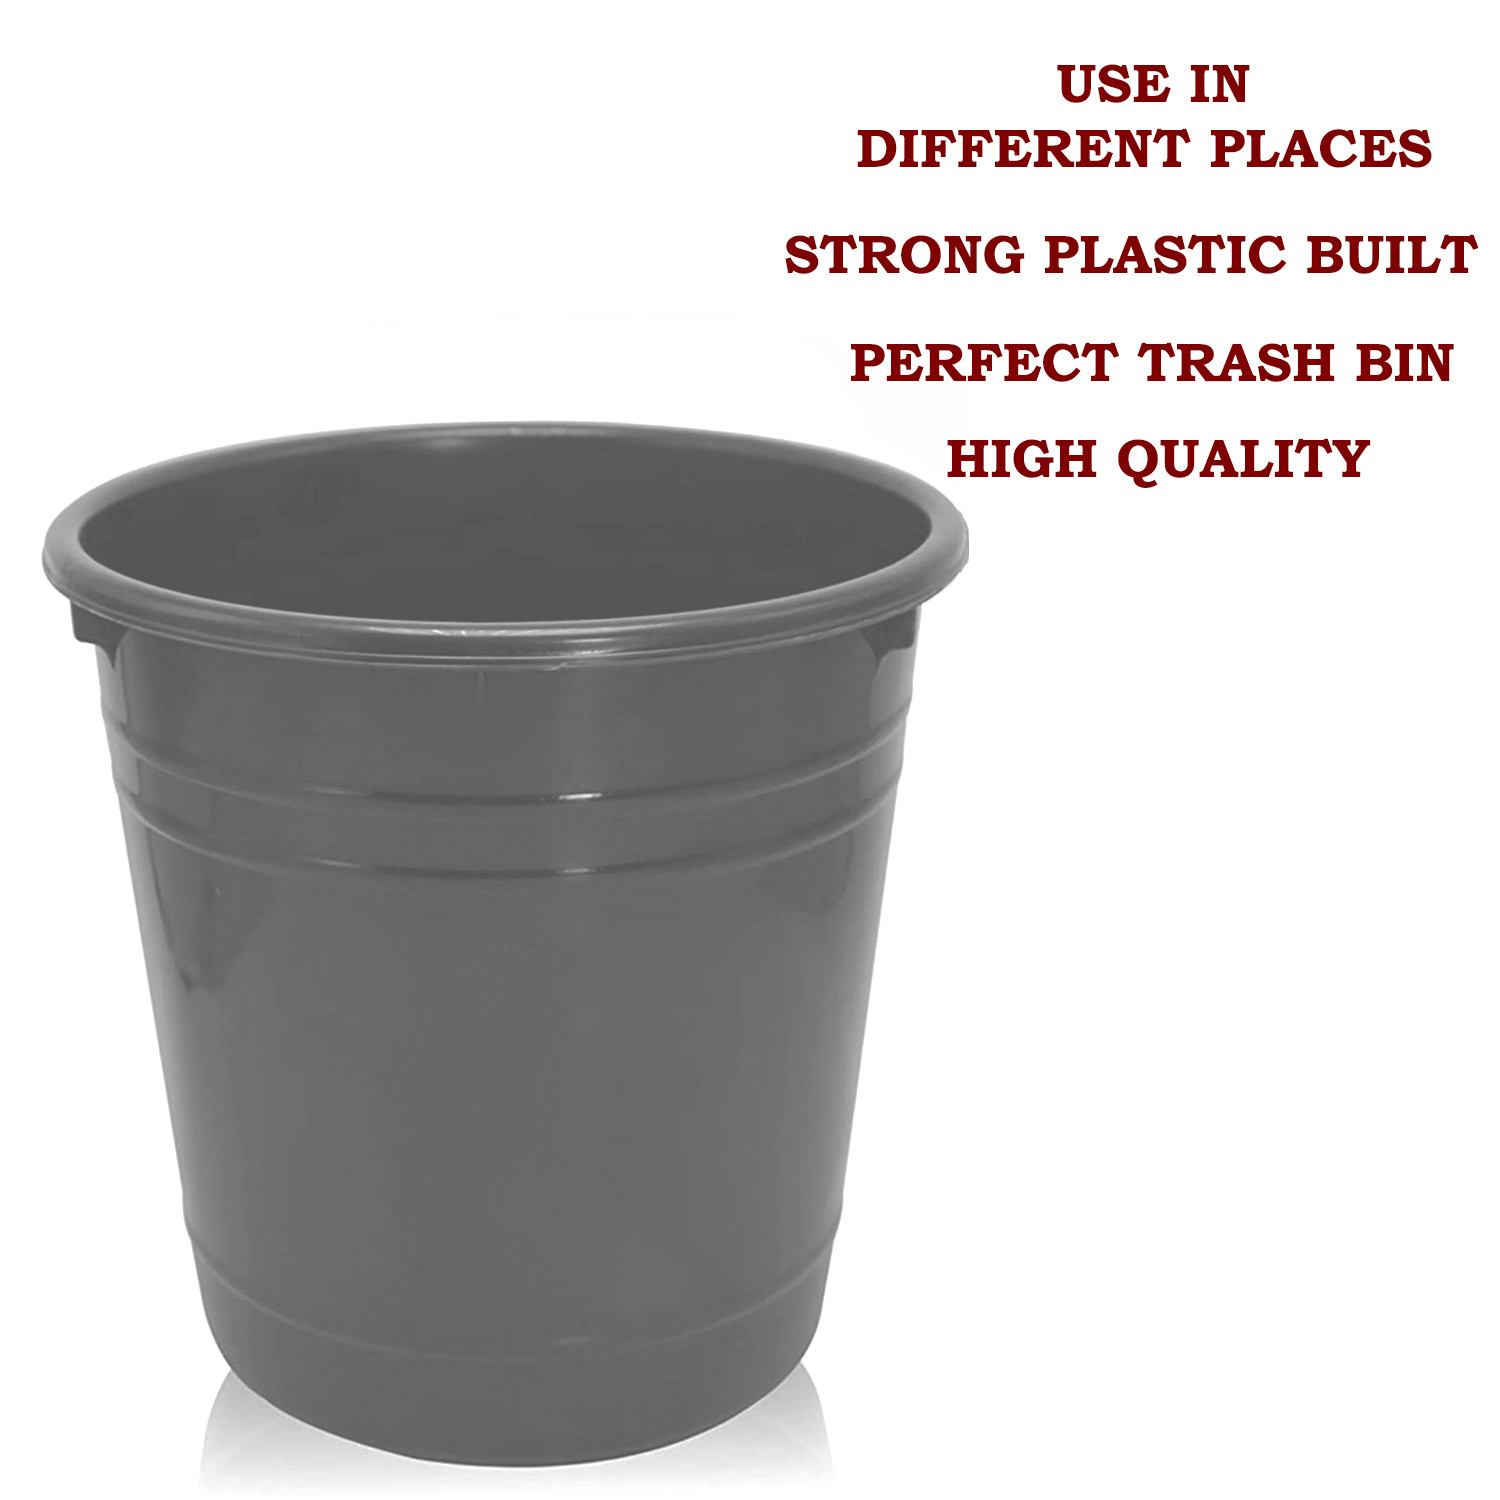 Kuber Industries Plastic Dustbin|Portable Garbage Basket & Round Trash Can for Home,Kitchen,Office,College,5 Ltr.(Gray)